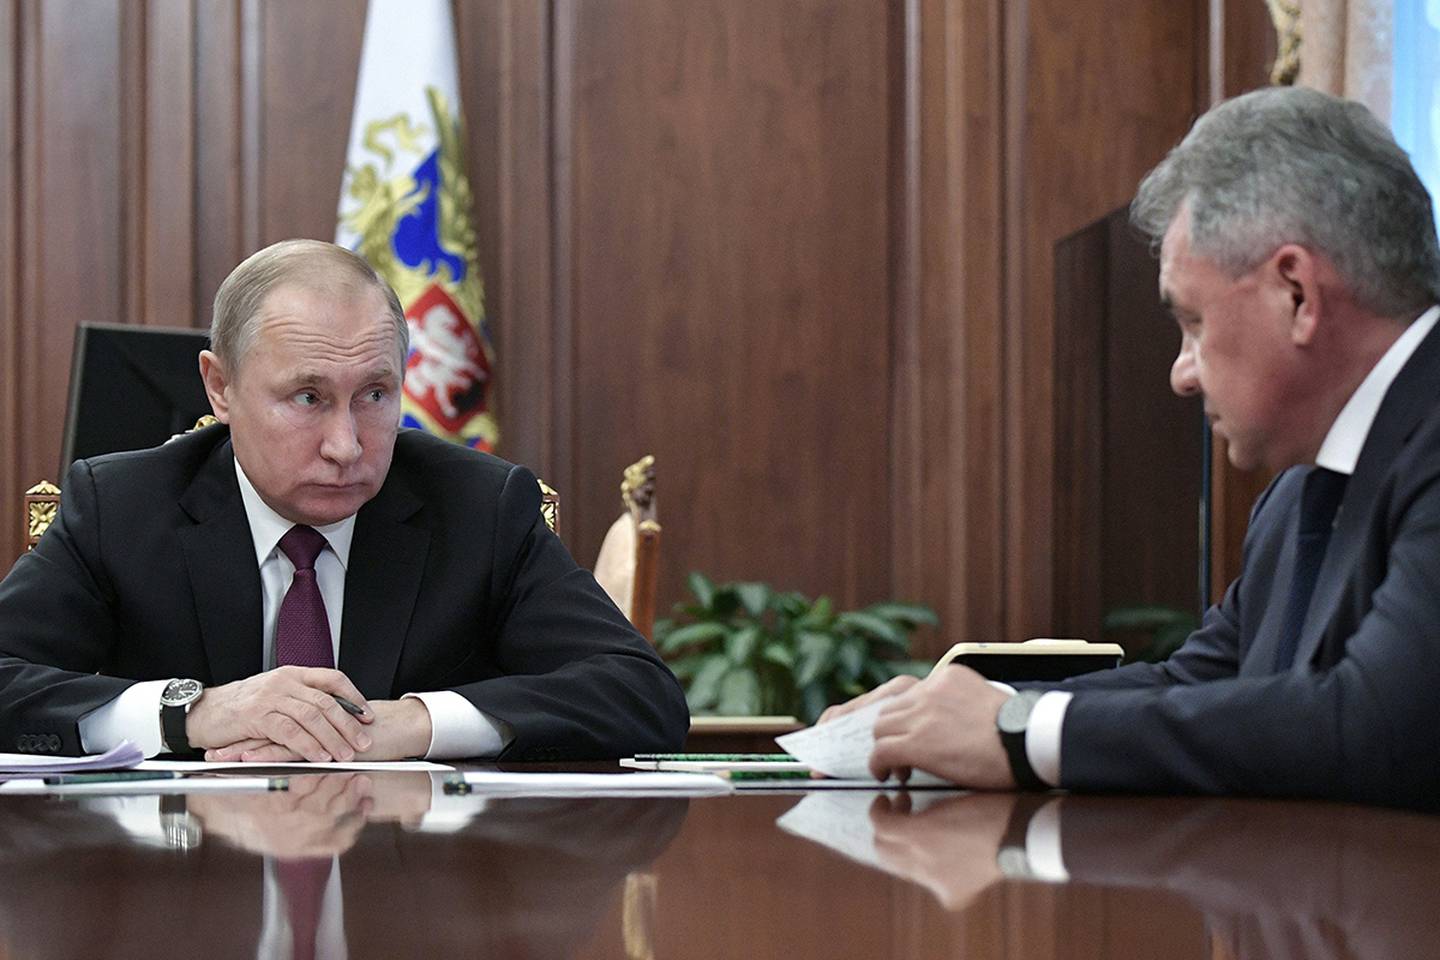 In this Feb. 2, 2019, file photo, Russian President Vladimir Putin, left, speaks to Defense Minister Sergei Shoigu during a meeting in the Kremlin in Moscow.